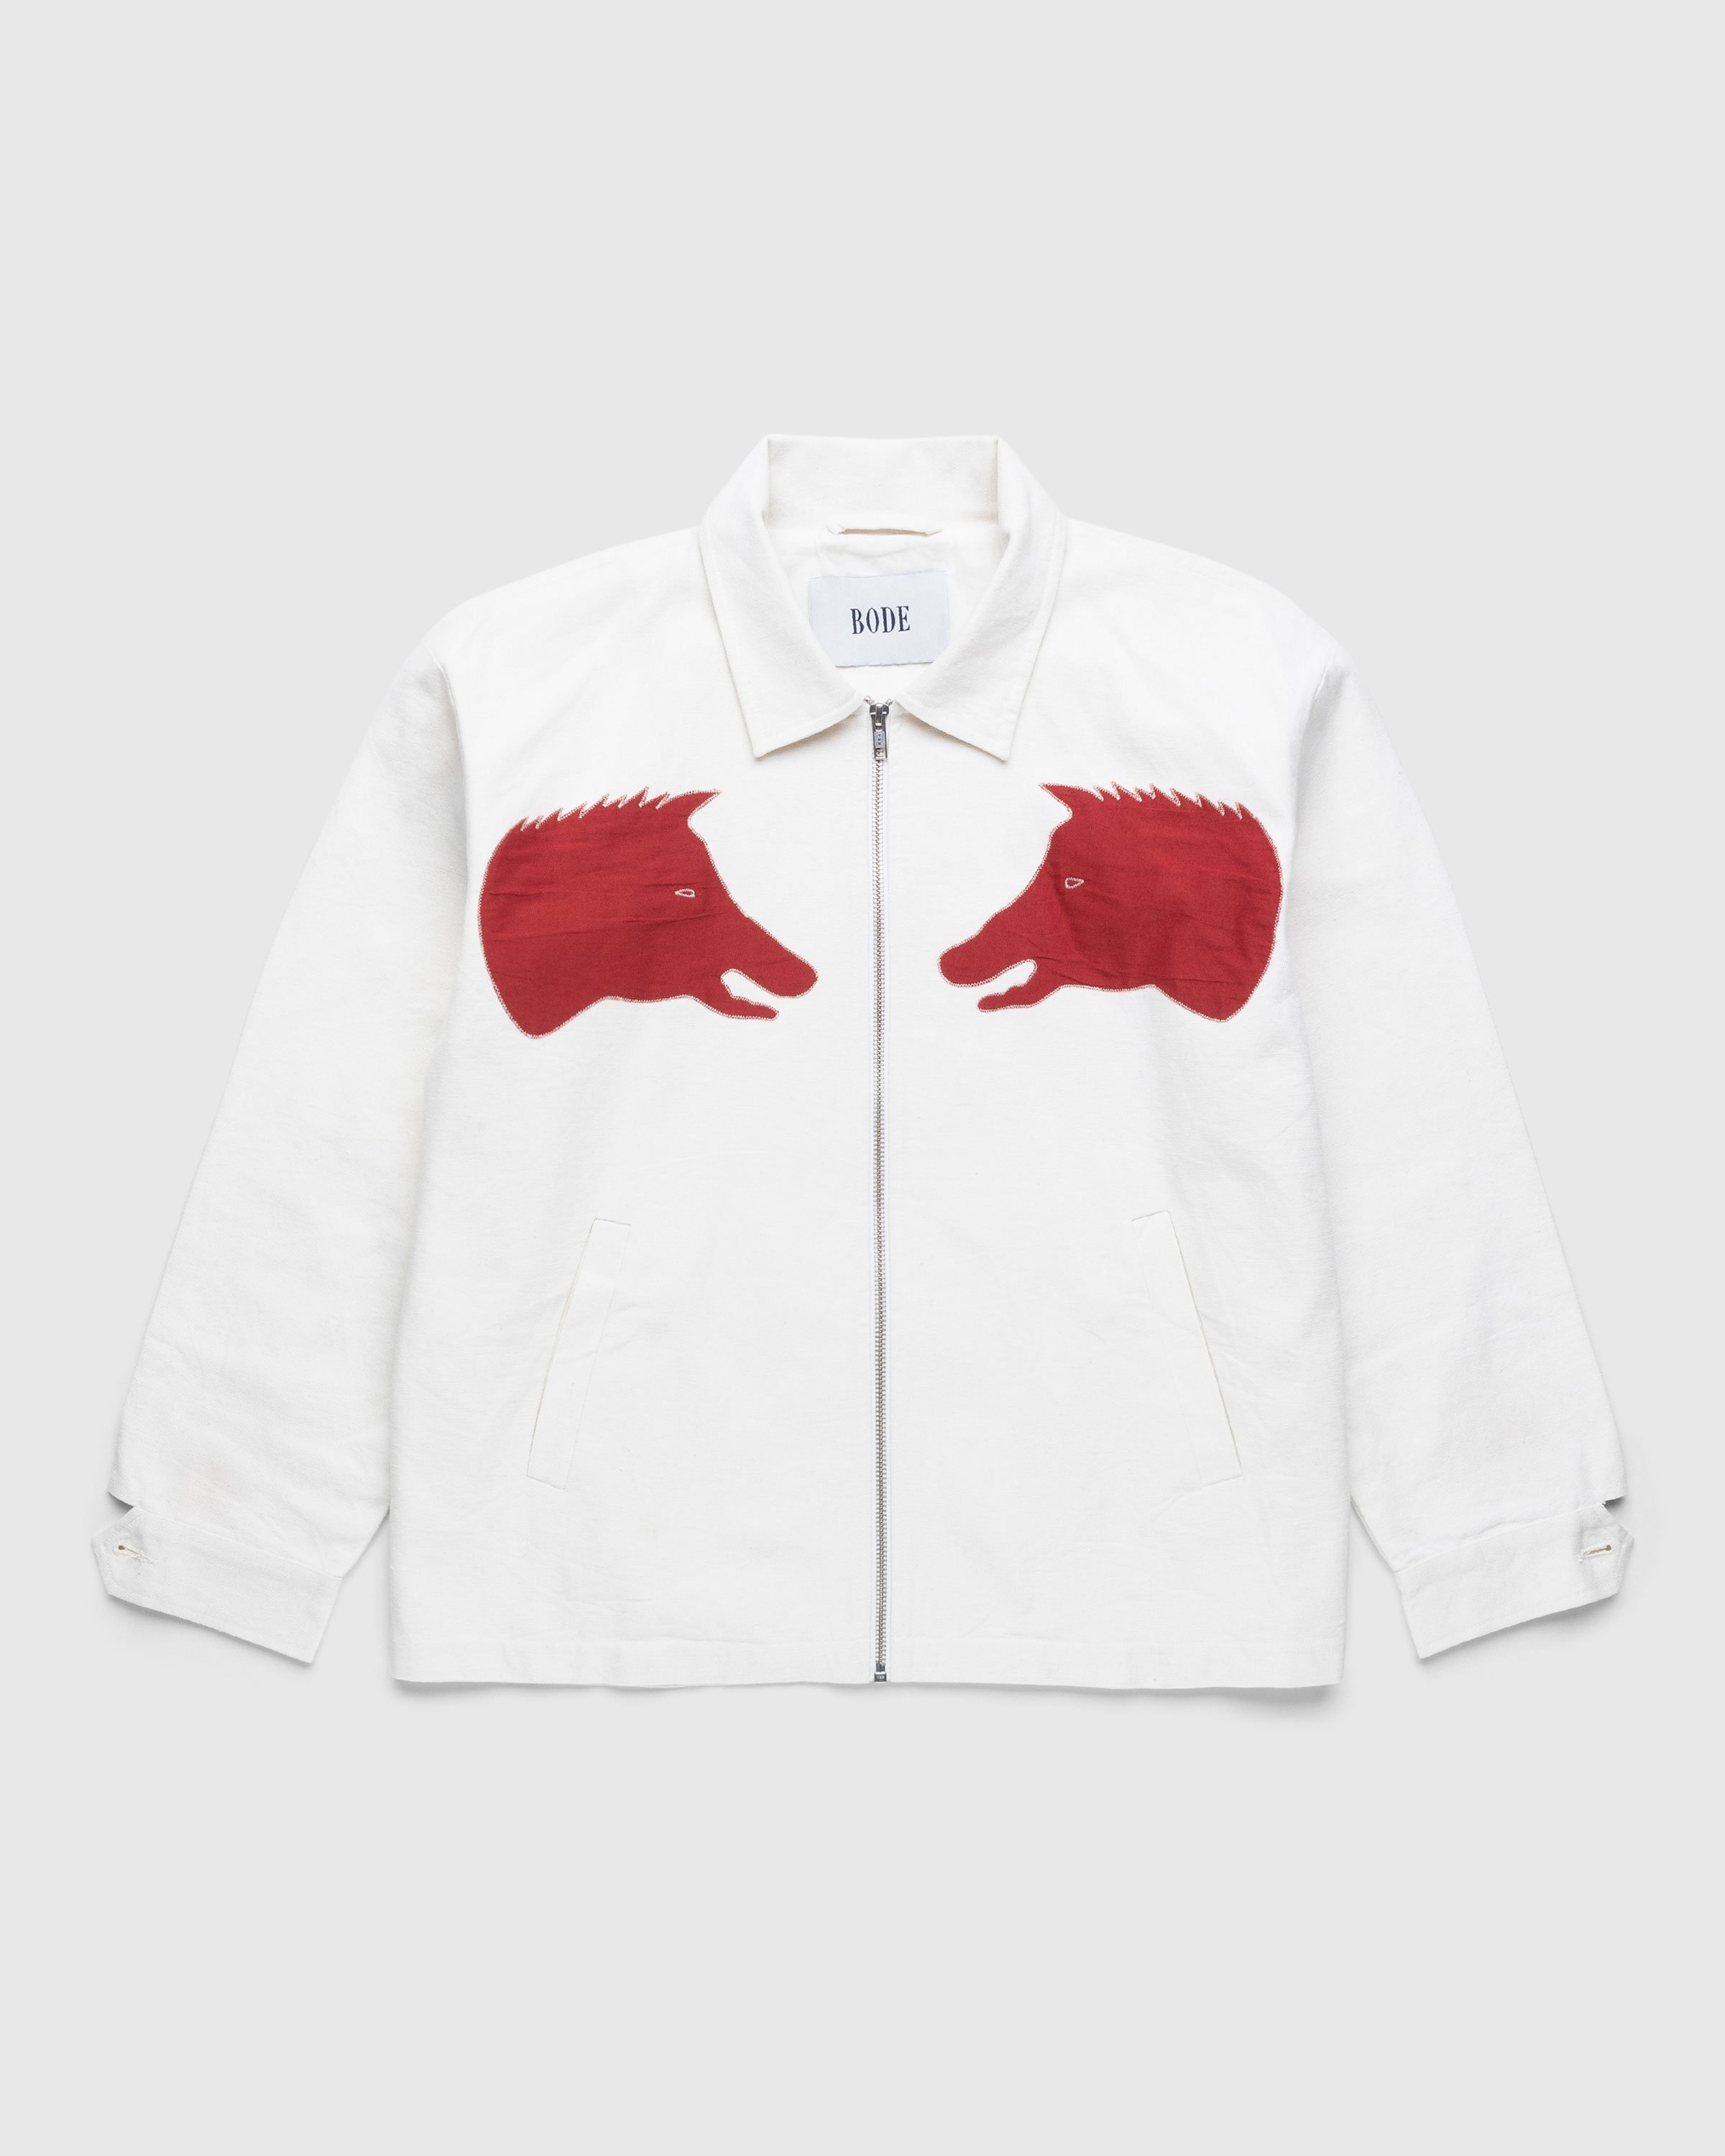 Bode - Boar Applique Jacket White/Red - Clothing - White - Image 1